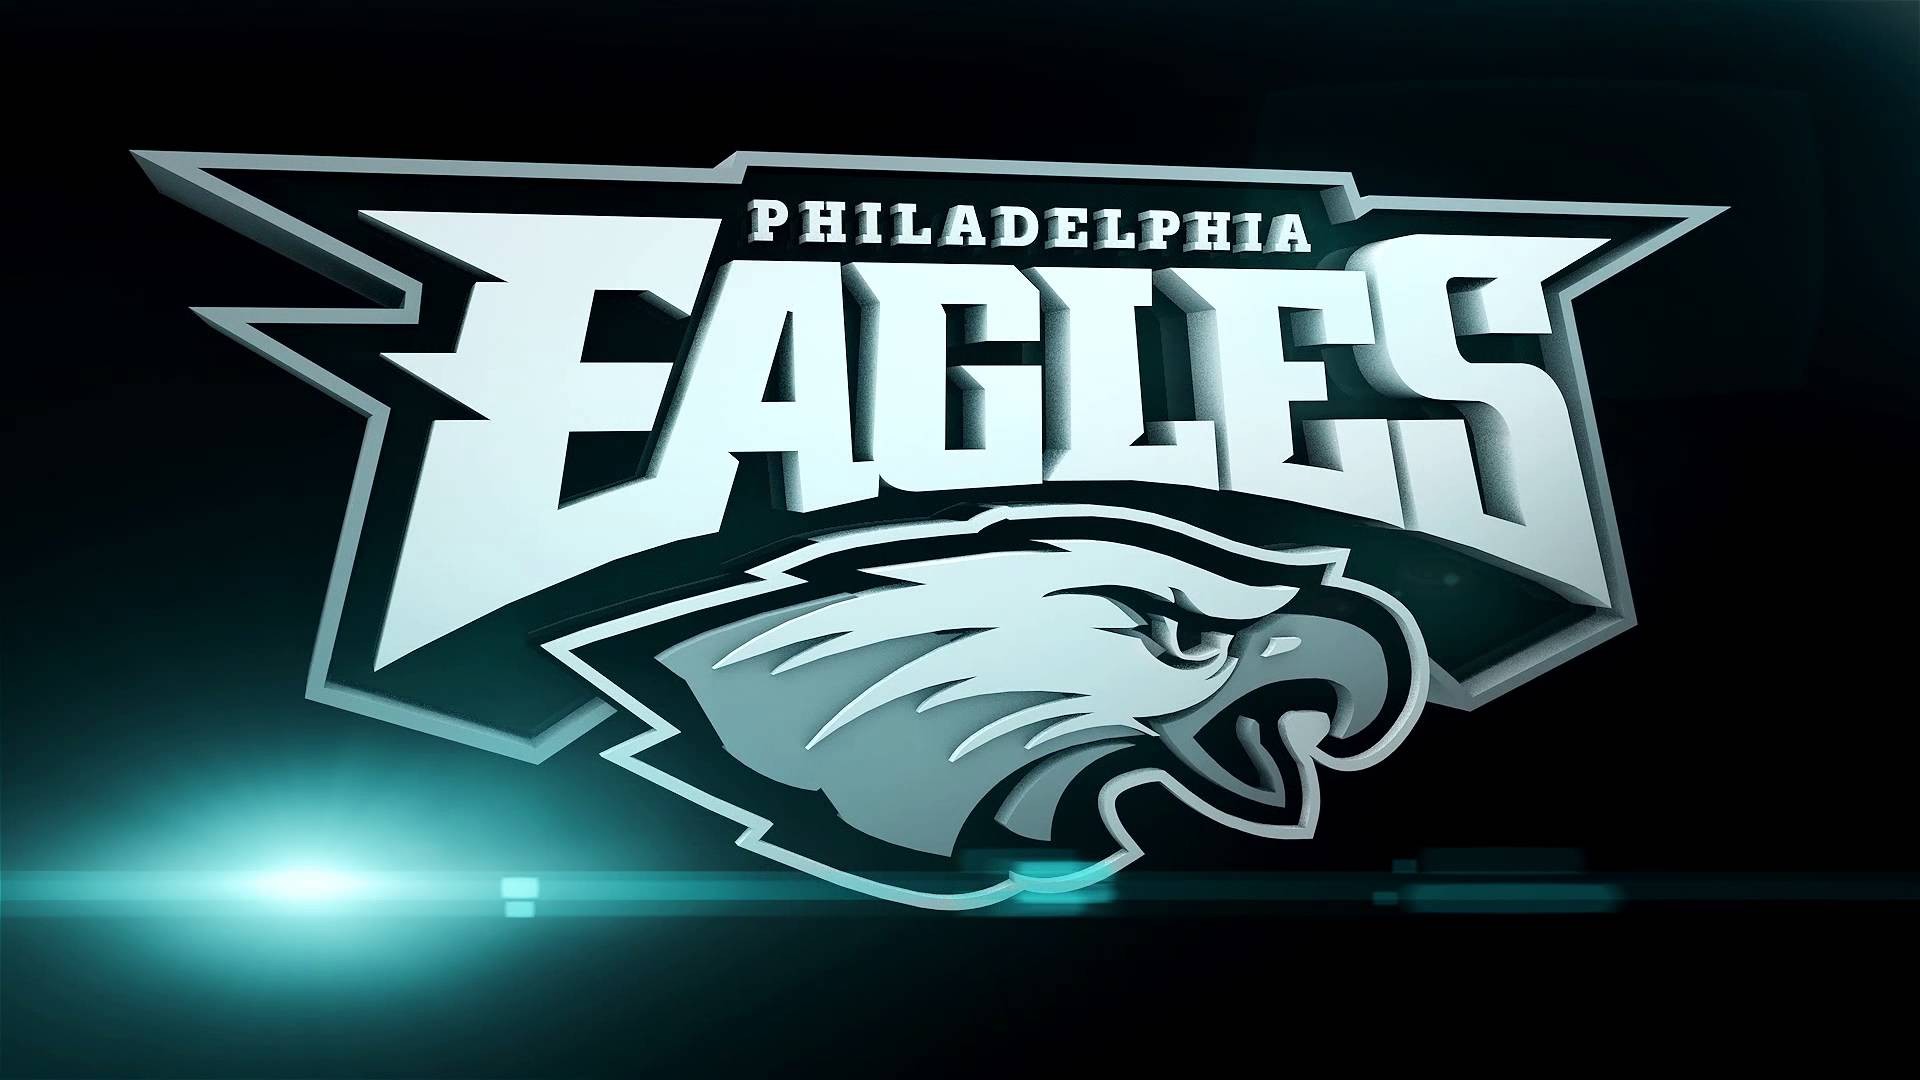 Philadelphia Eagles Mac Backgrounds With Resolution 1920X1080 pixel. You can make this wallpaper for your Mac or Windows Desktop Background, iPhone, Android or Tablet and another Smartphone device for free